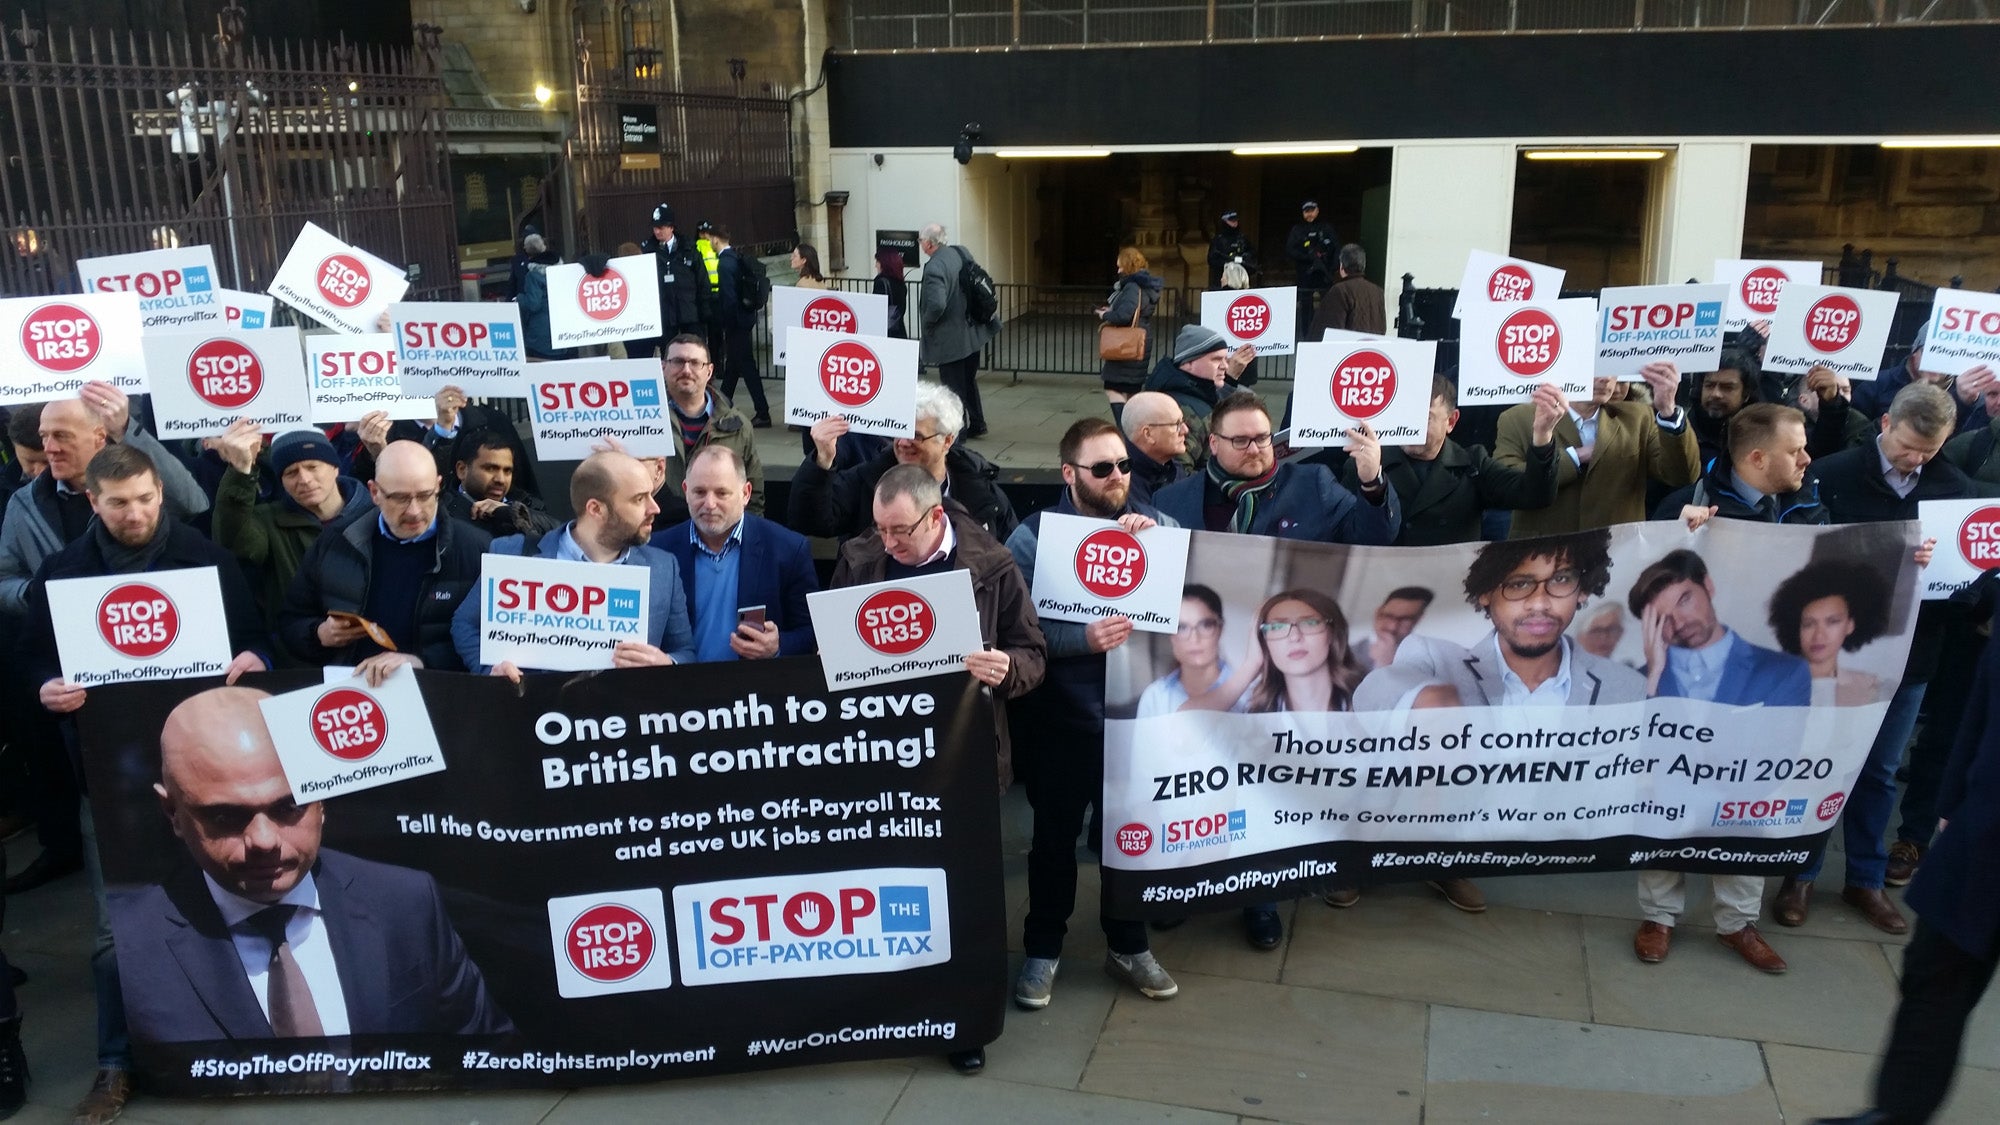 Protesters Call on Chancellor to End "Zero Rights Employment" Under IR35